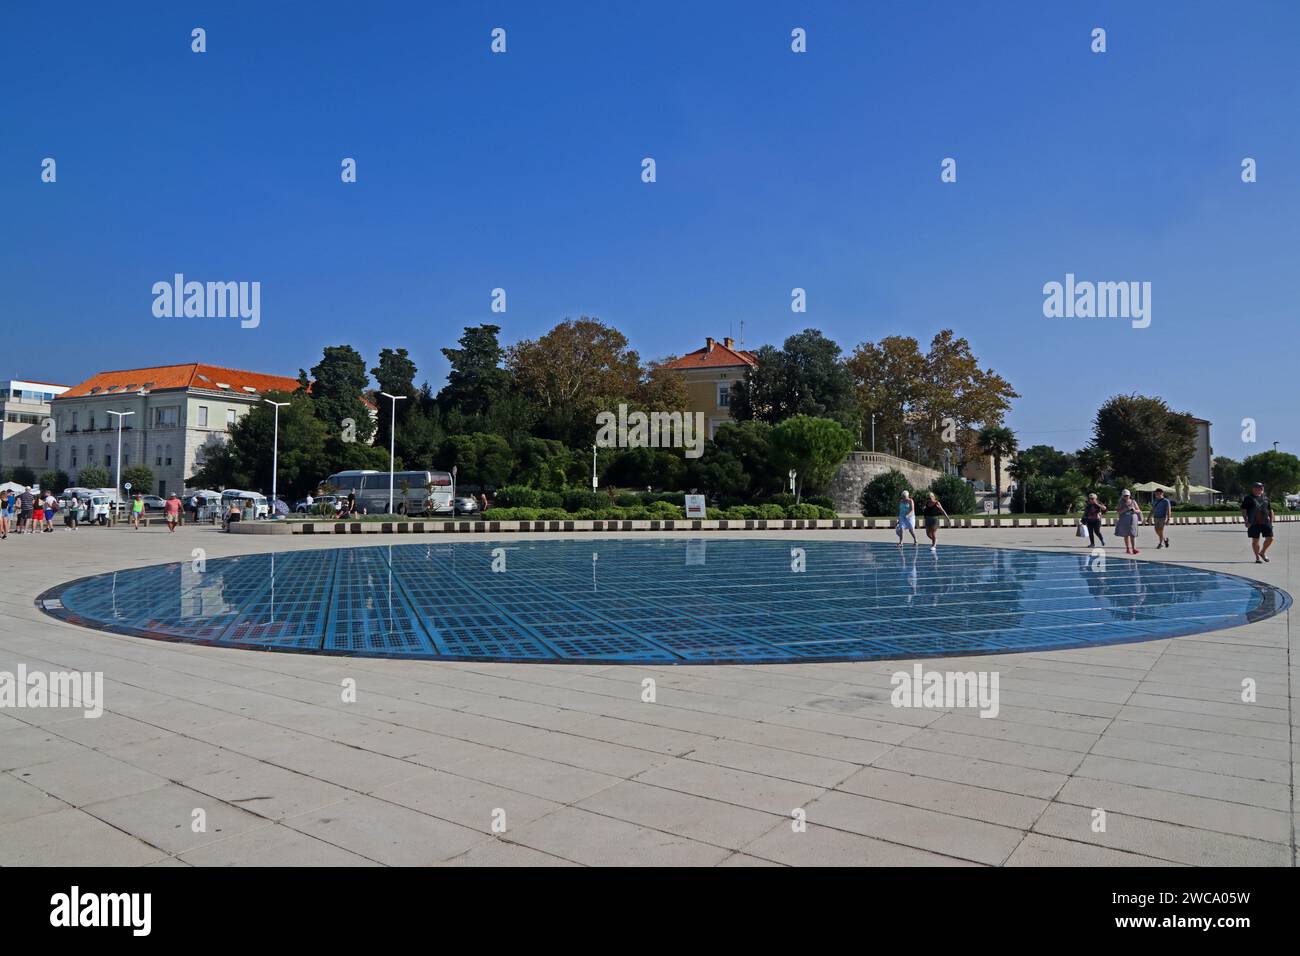 Greeting to the Sun, a solar panel installation which supplies lighting display in evening , Zadar, Croatia Stock Photo